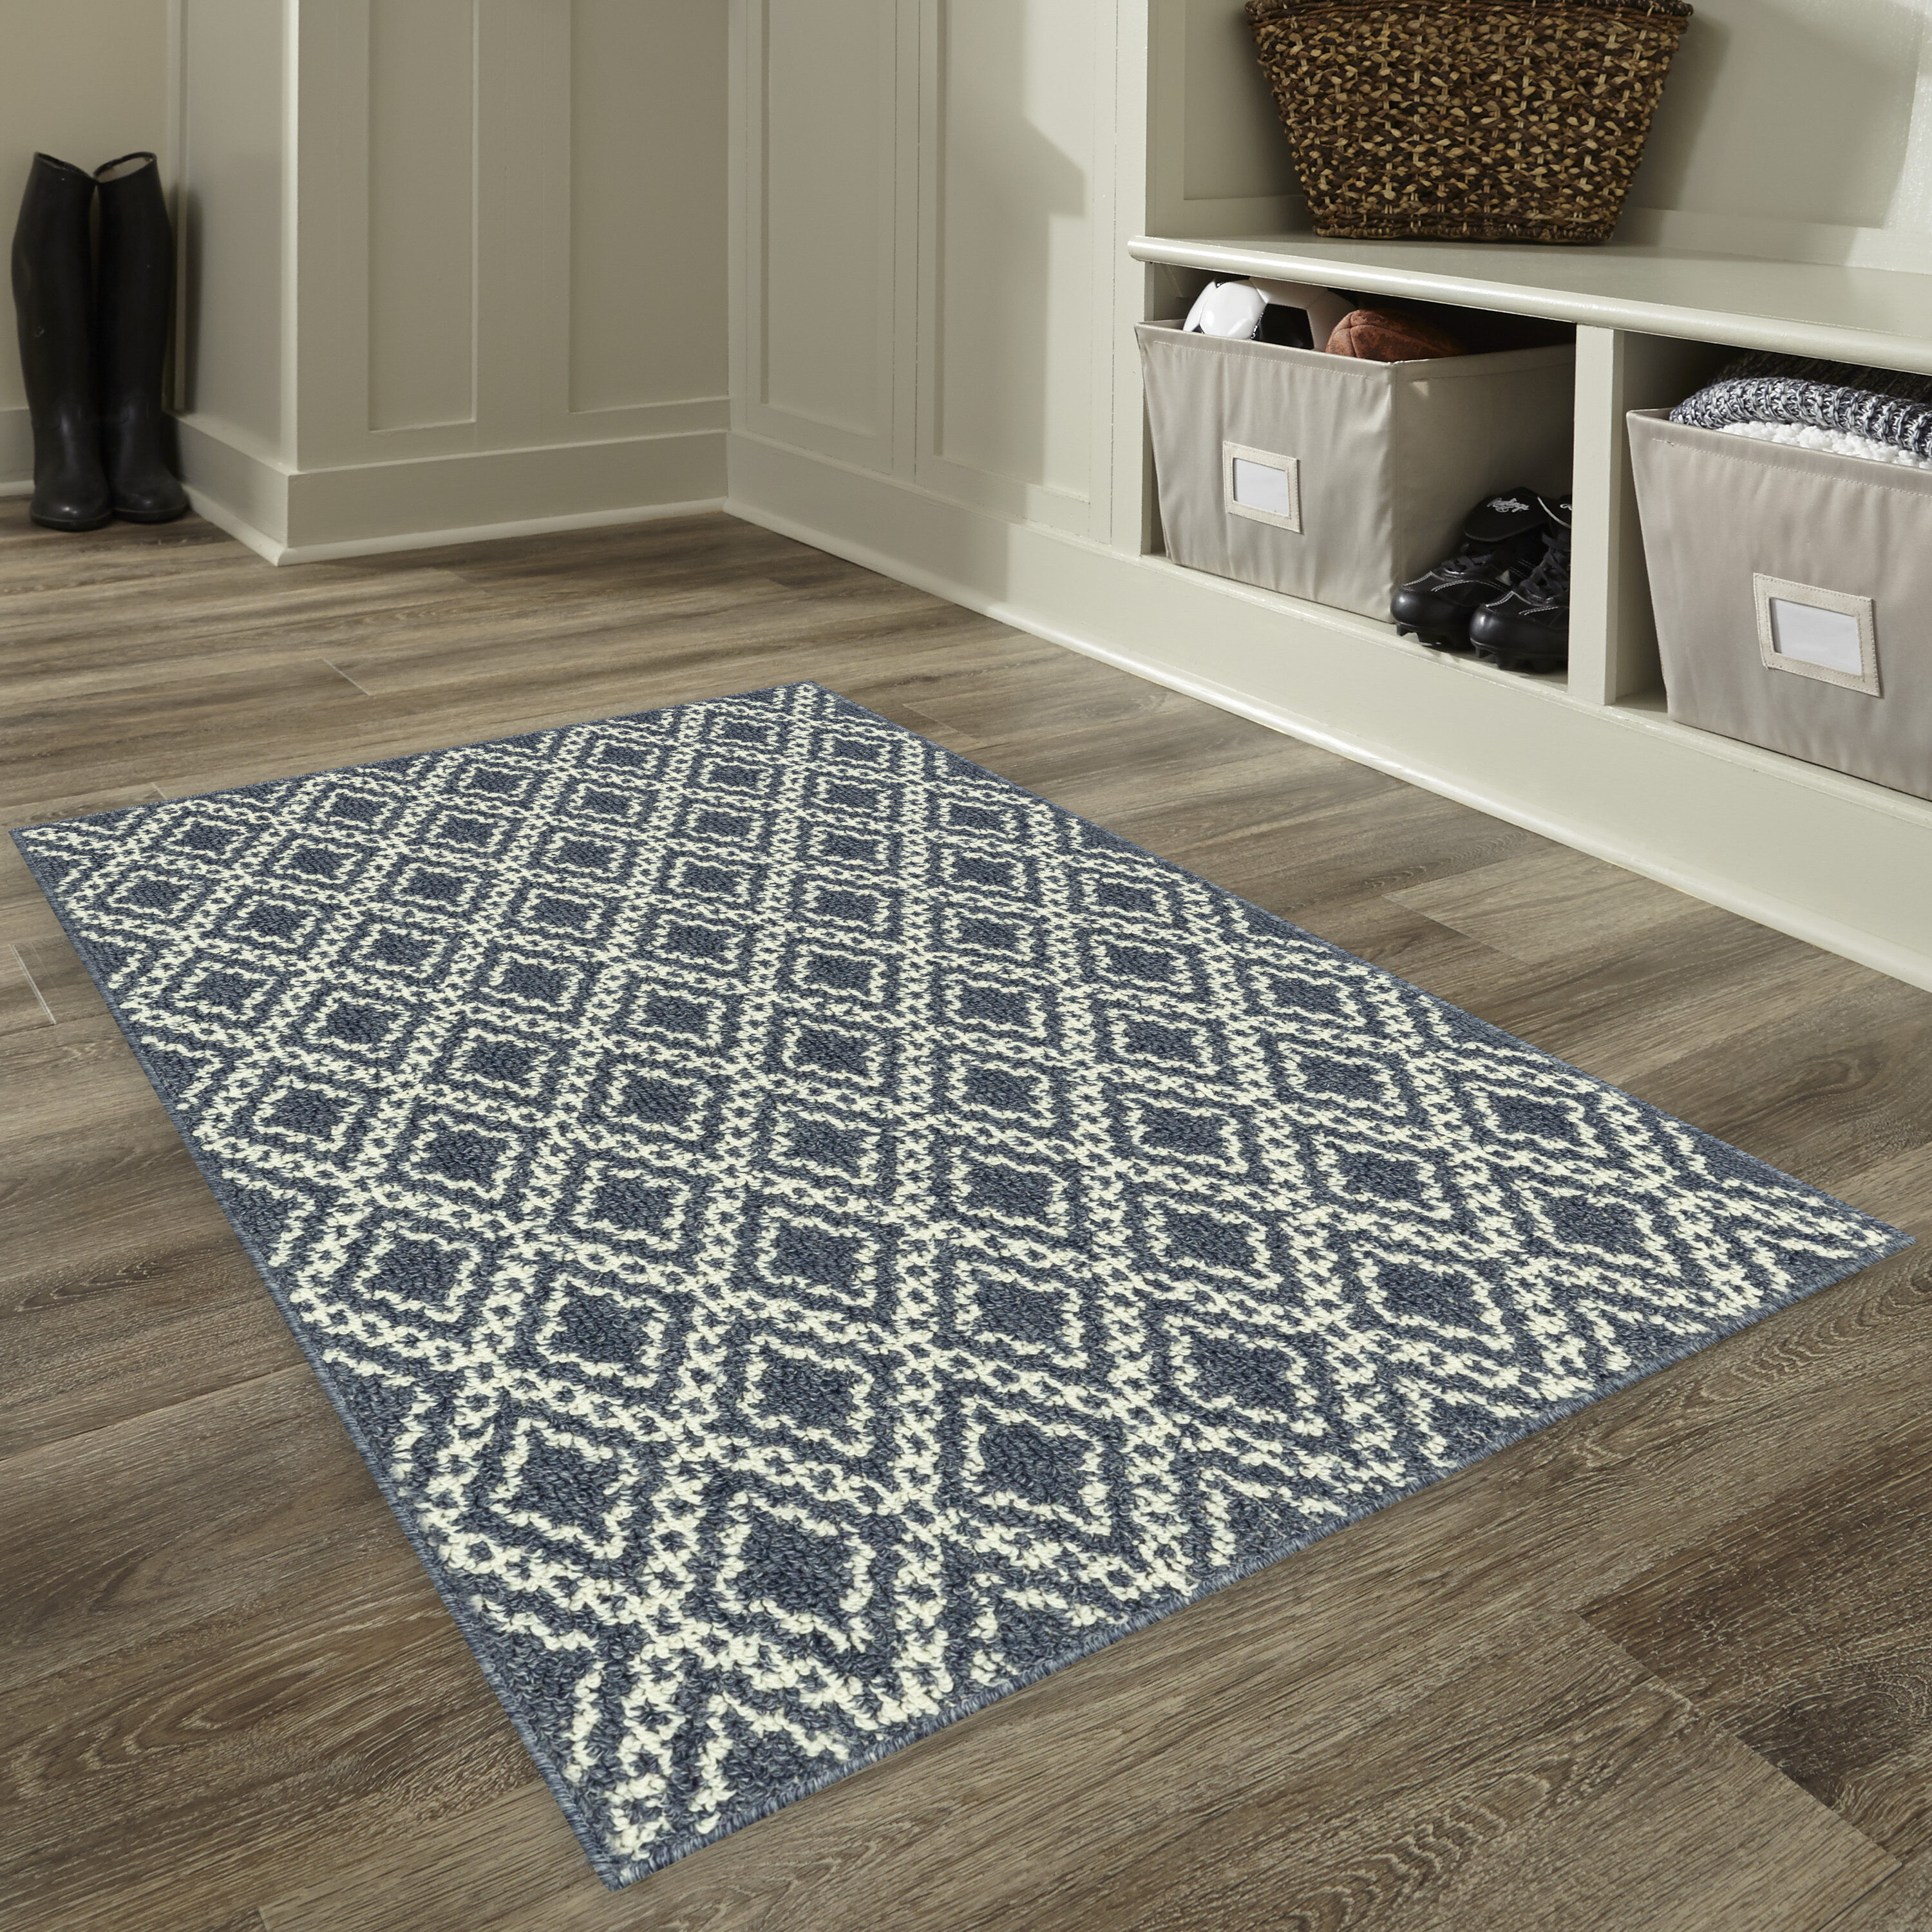  Parrot Rug 3x4 Area Rug White Flower Rugs for Entryway